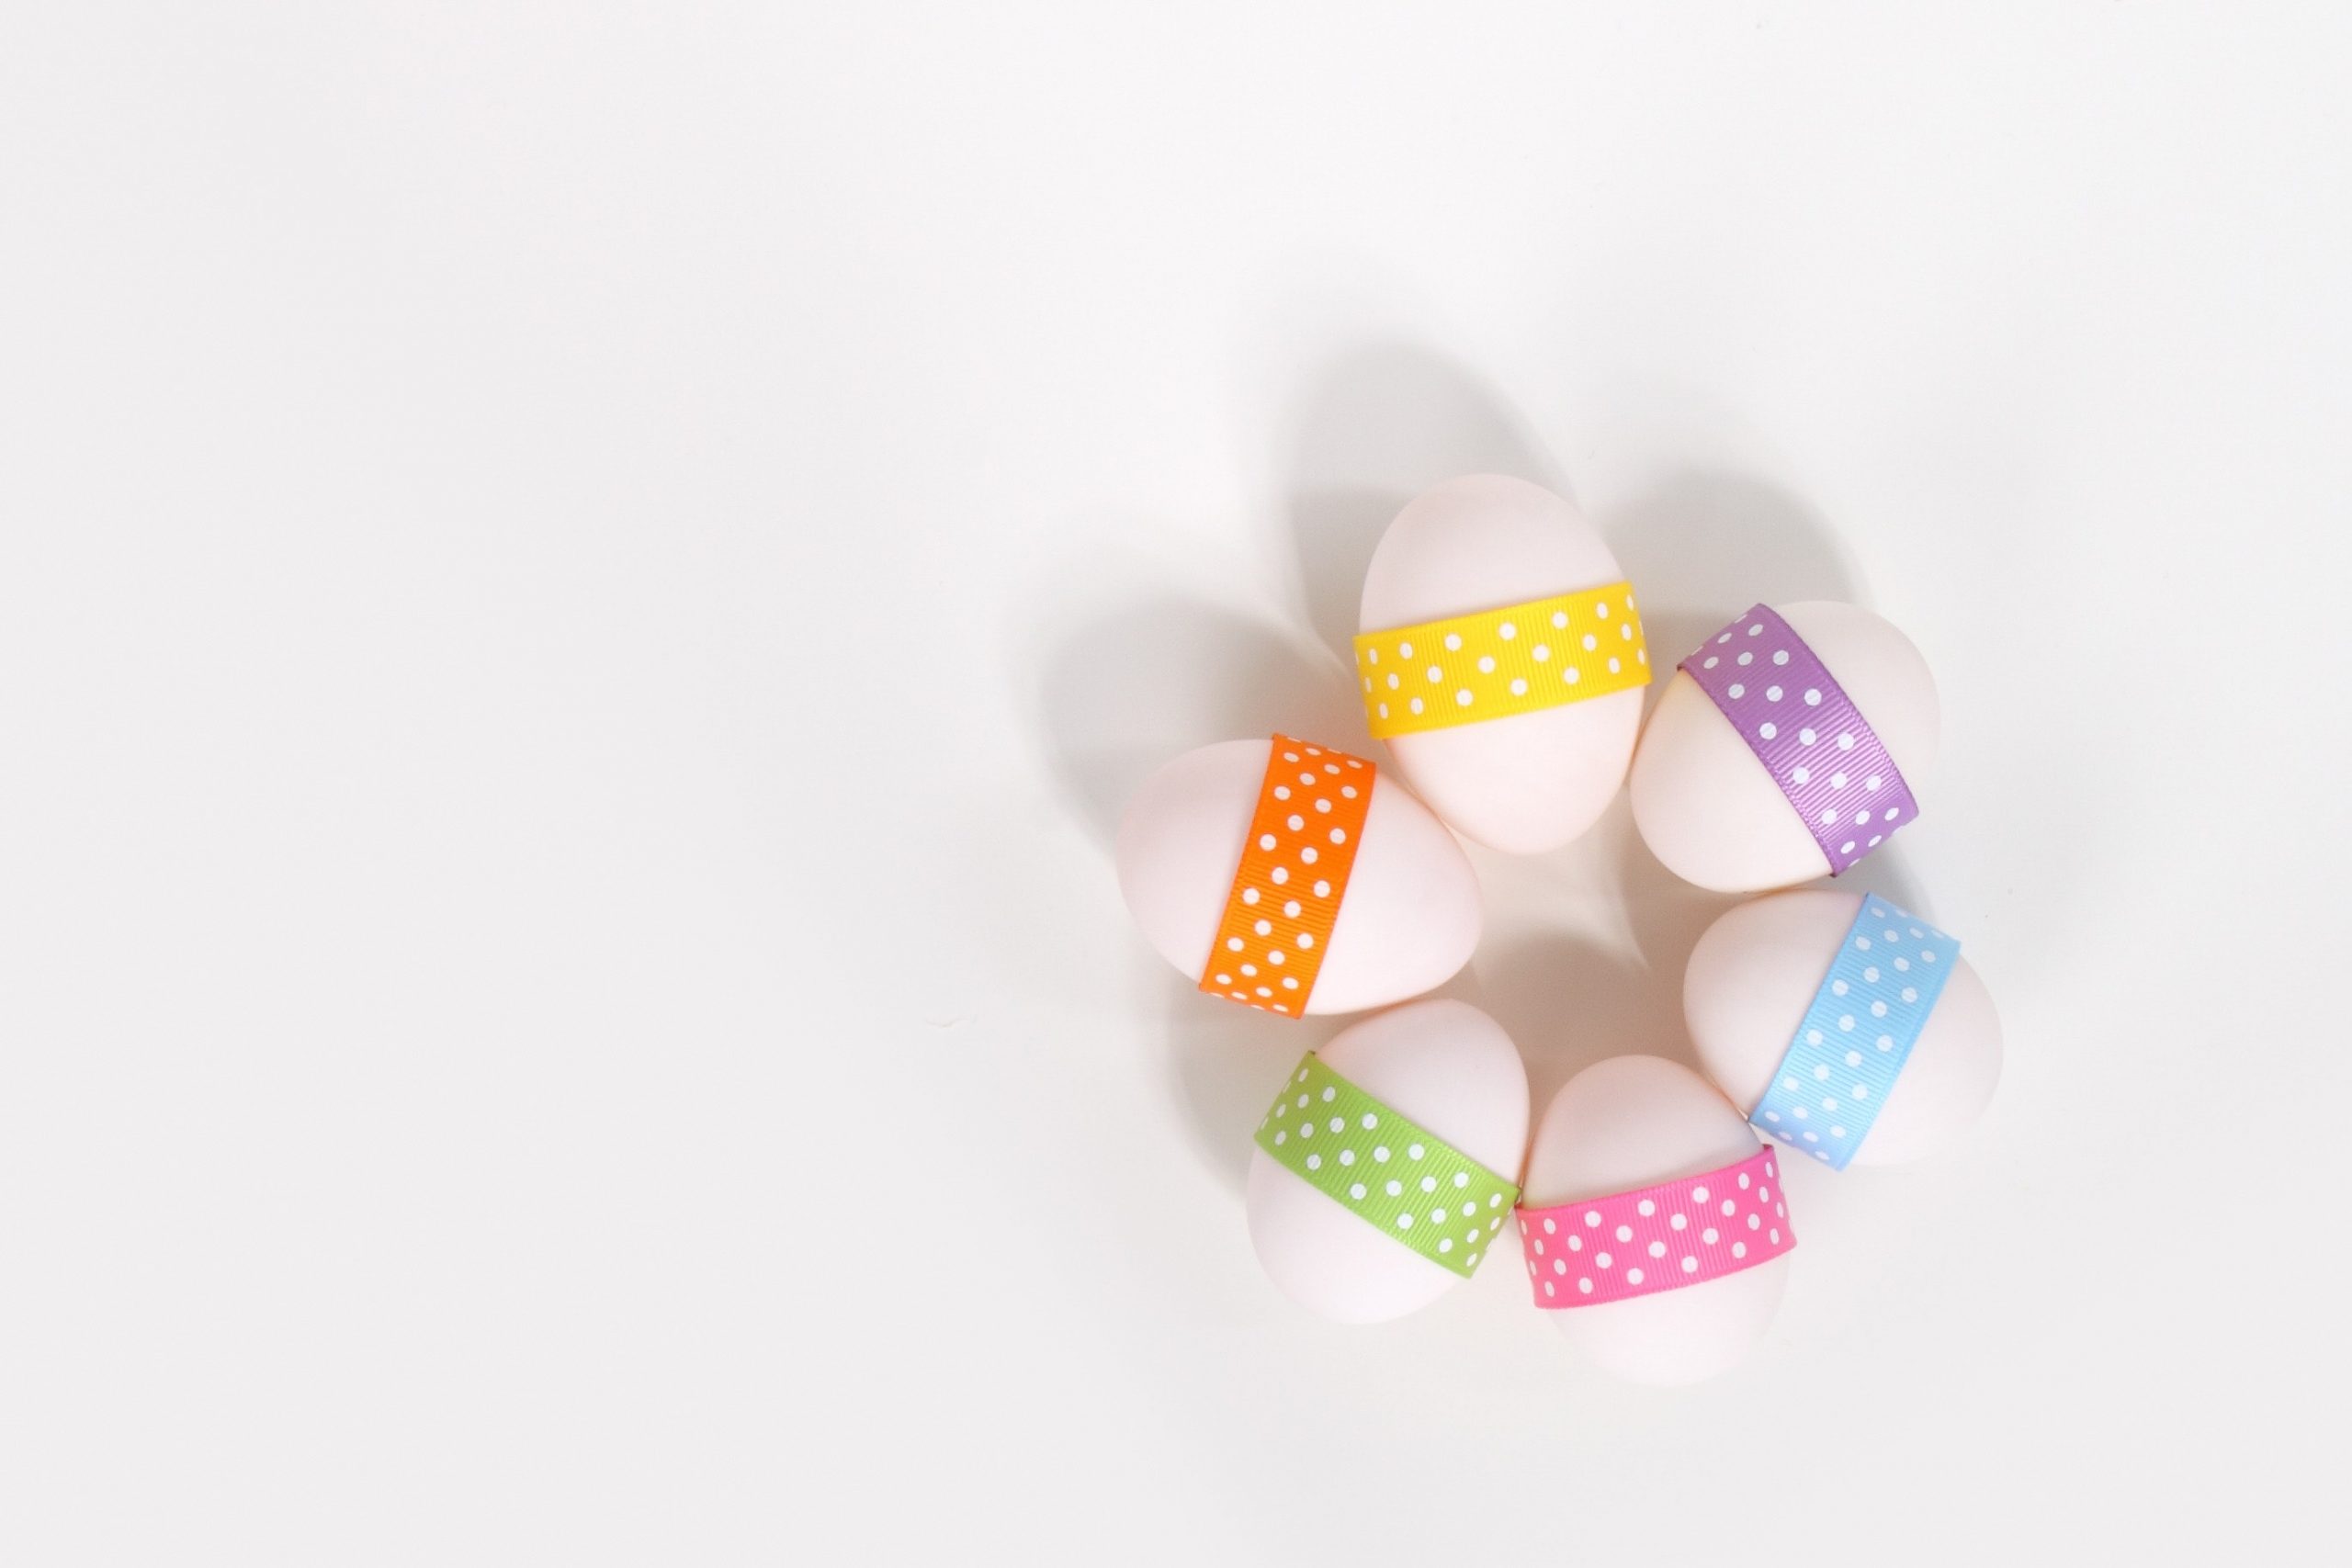 Three eggs have colorful ribbons with polka dots